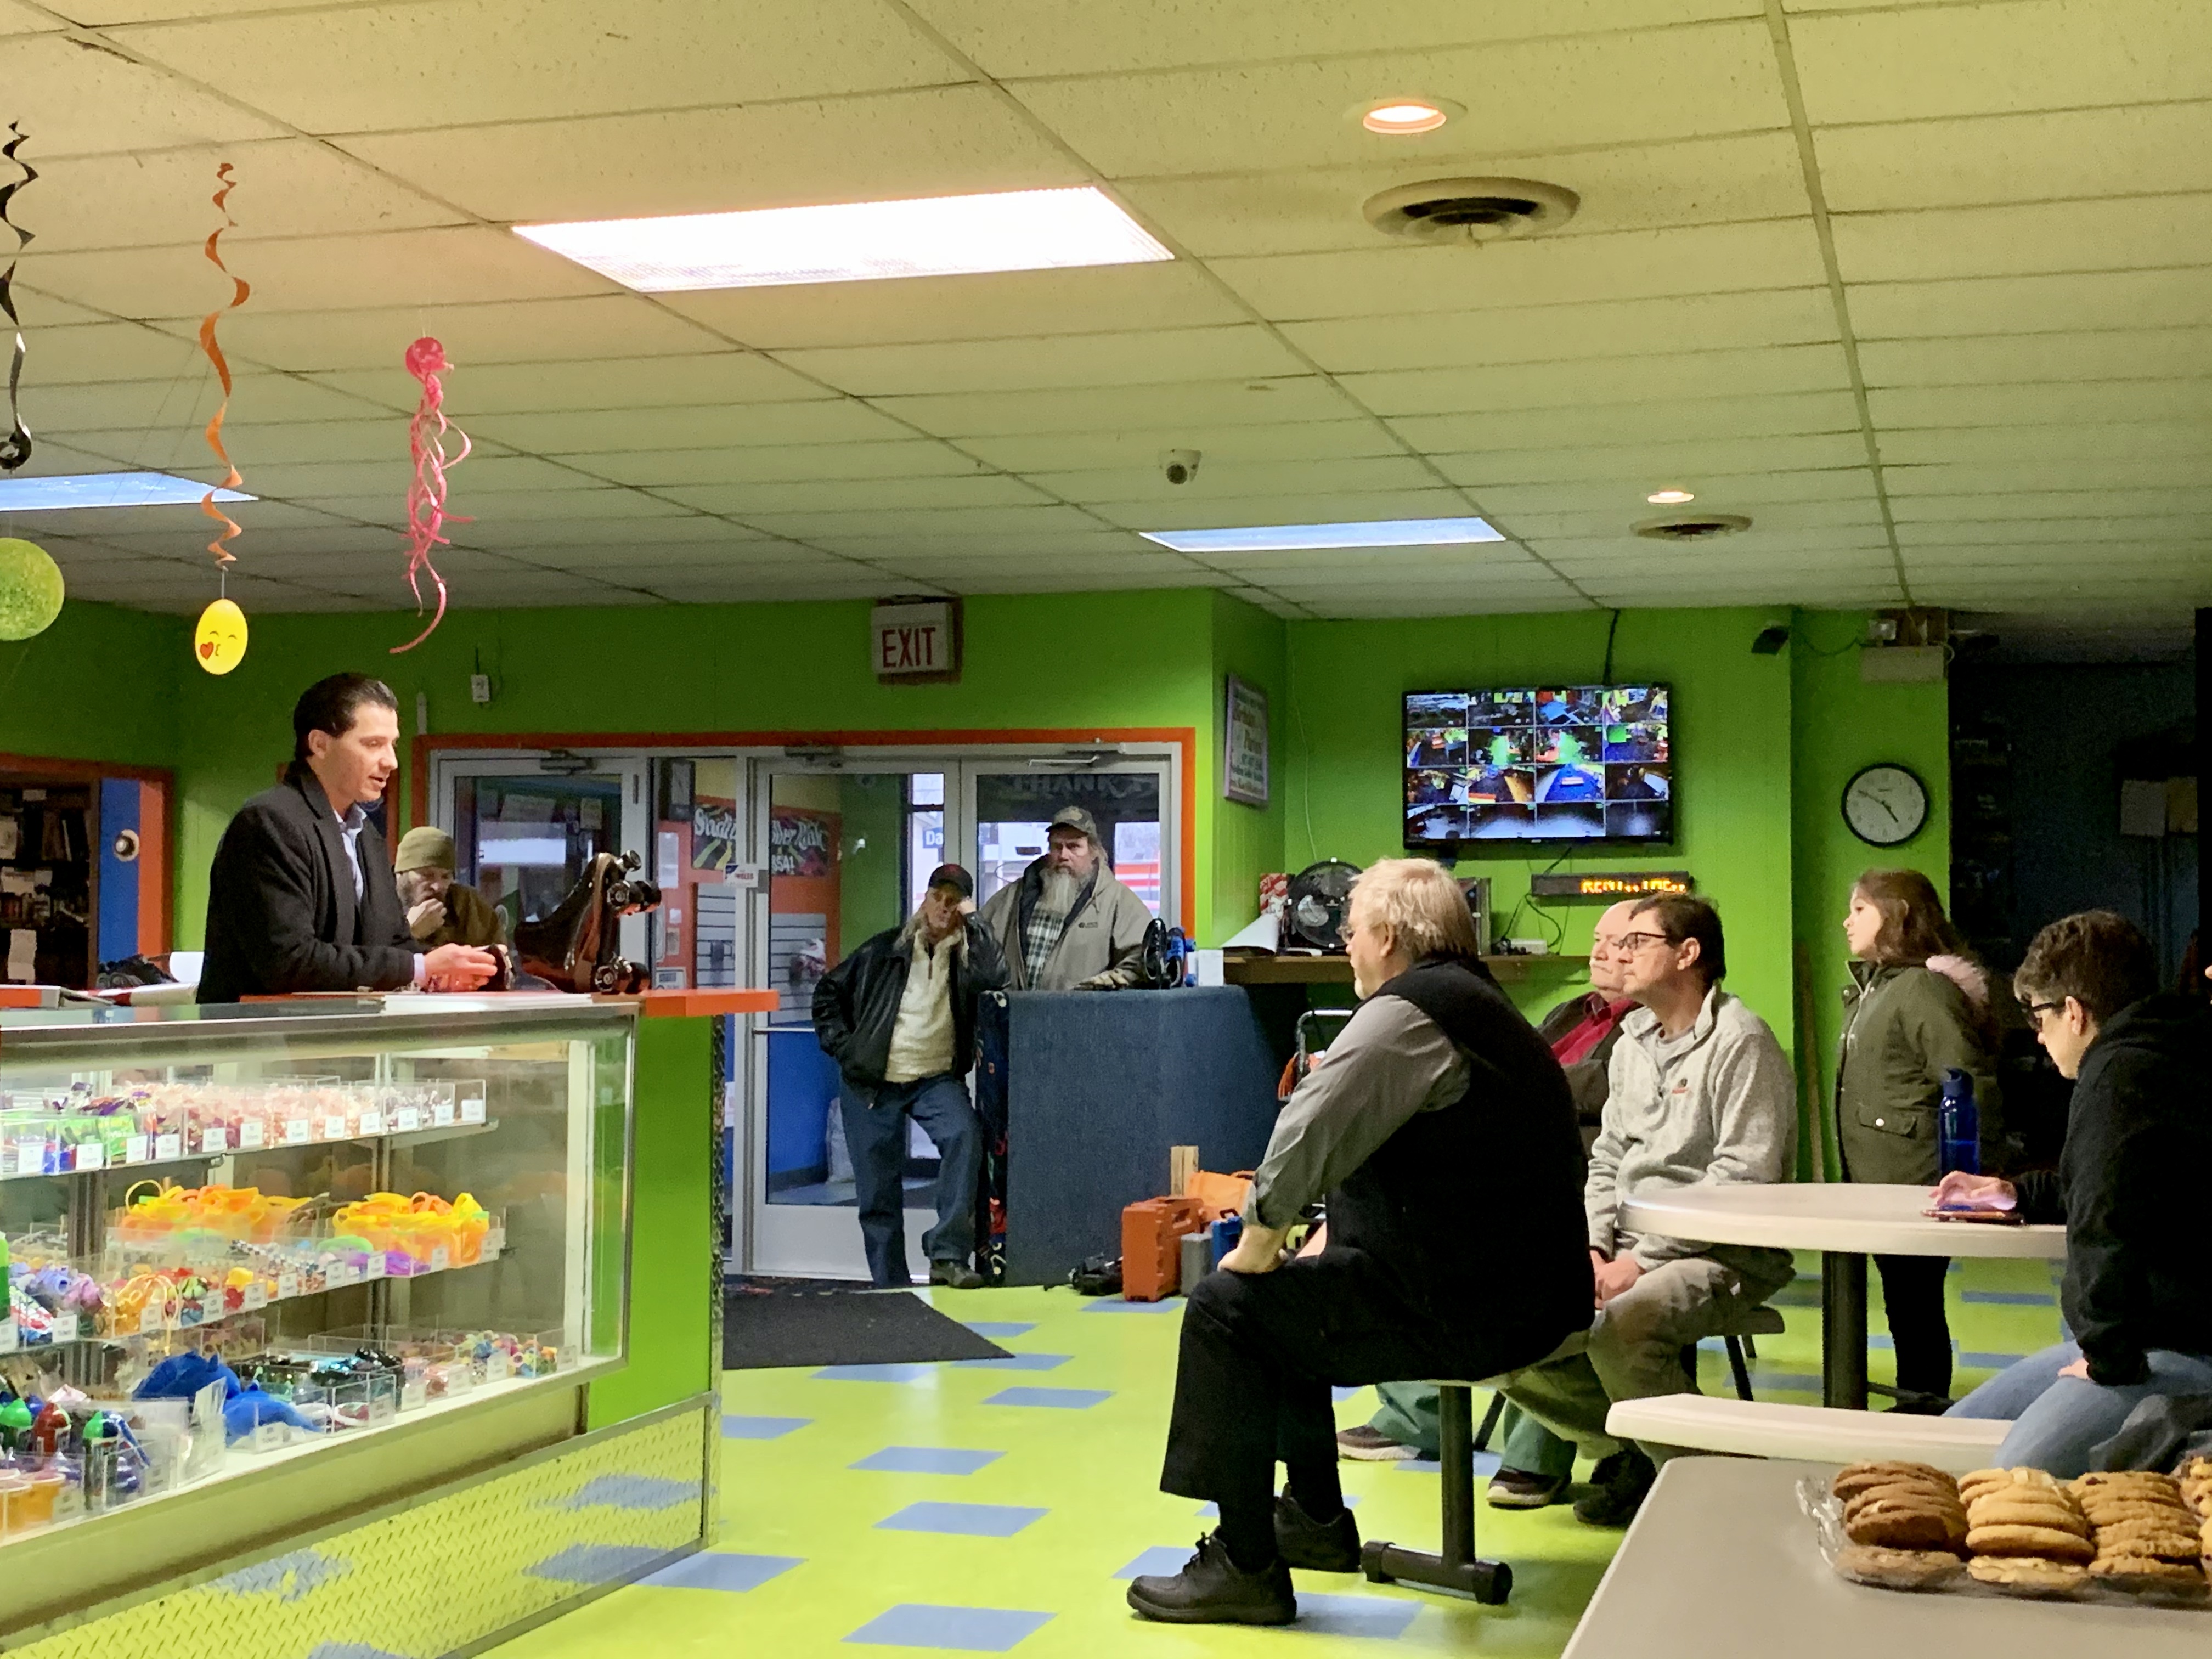 Local candidates hold meet-and-greet with residents at Stadium Roller Rink